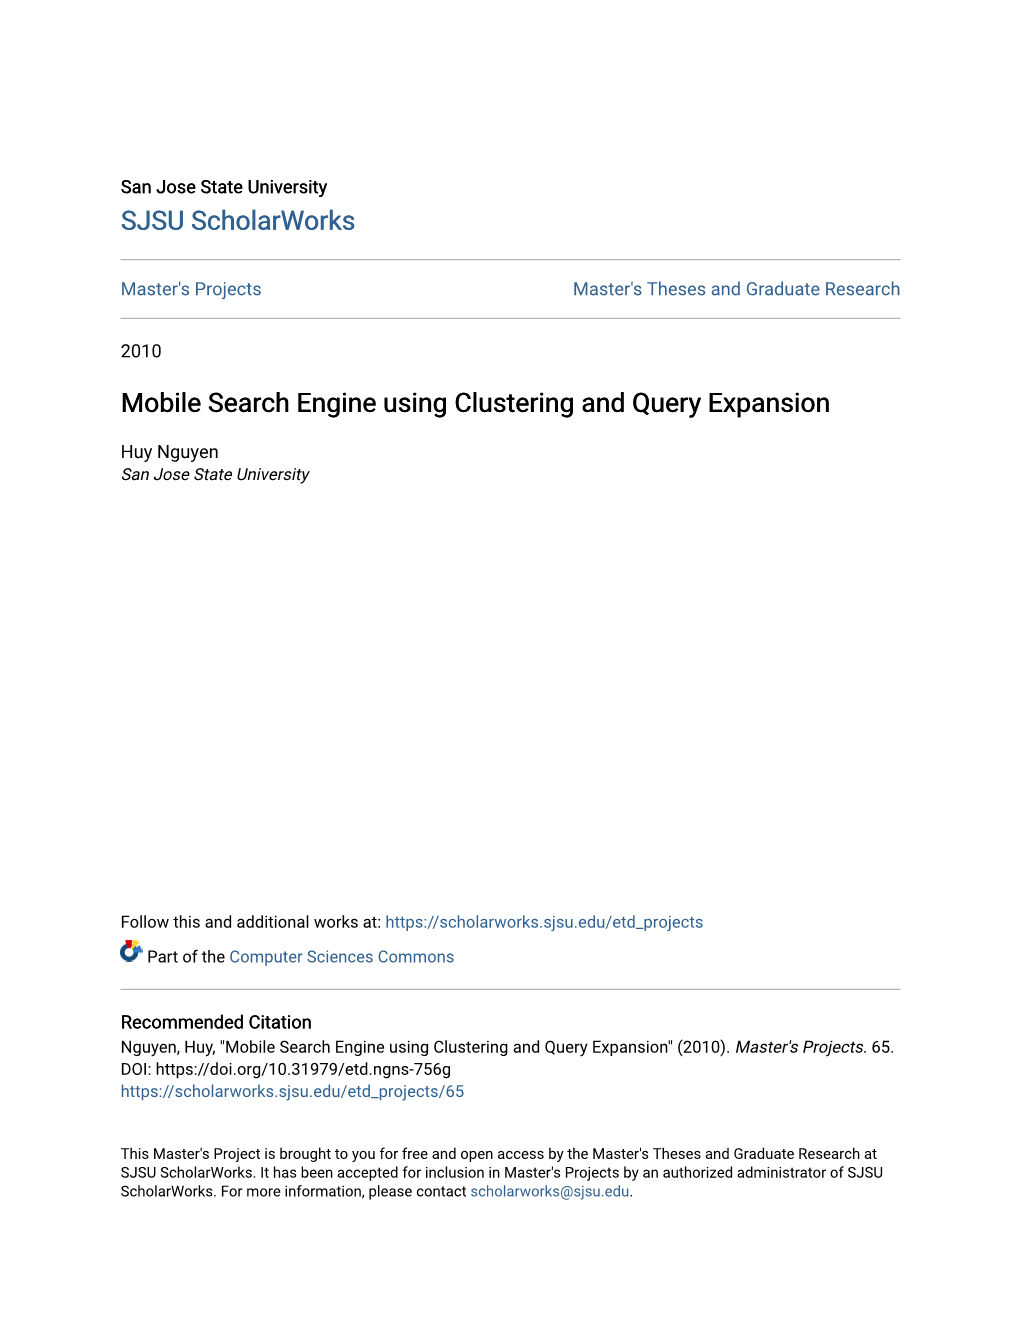 Mobile Search Engine Using Clustering and Query Expansion